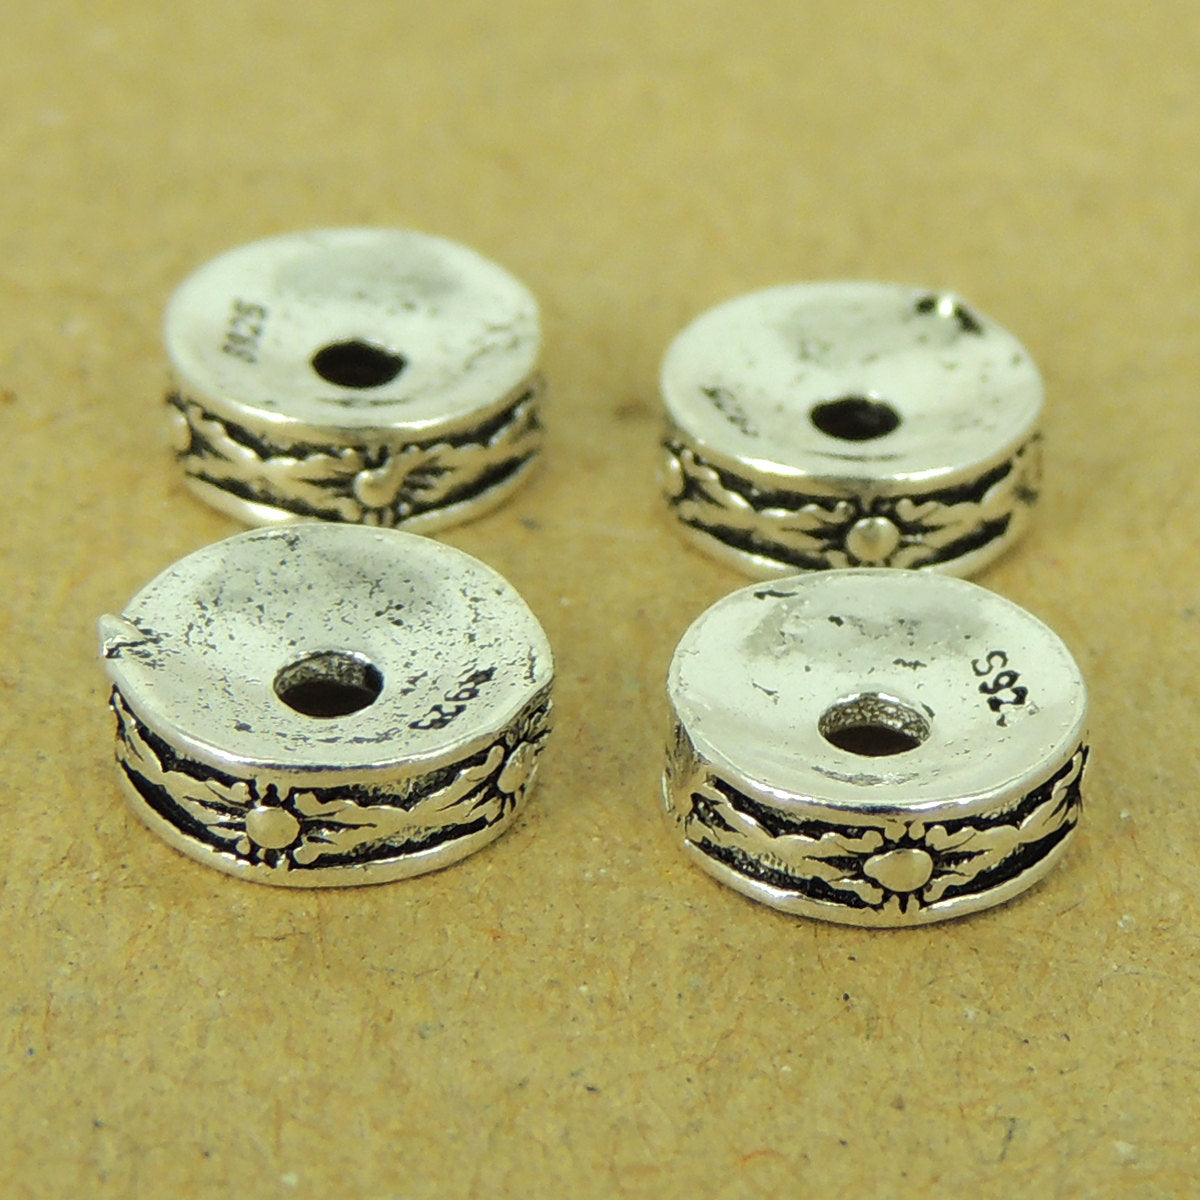 4 PCS Vintage Artisan Spacers - S925 Sterling Silver - Wholesale by Gem & Silver WSP461X4